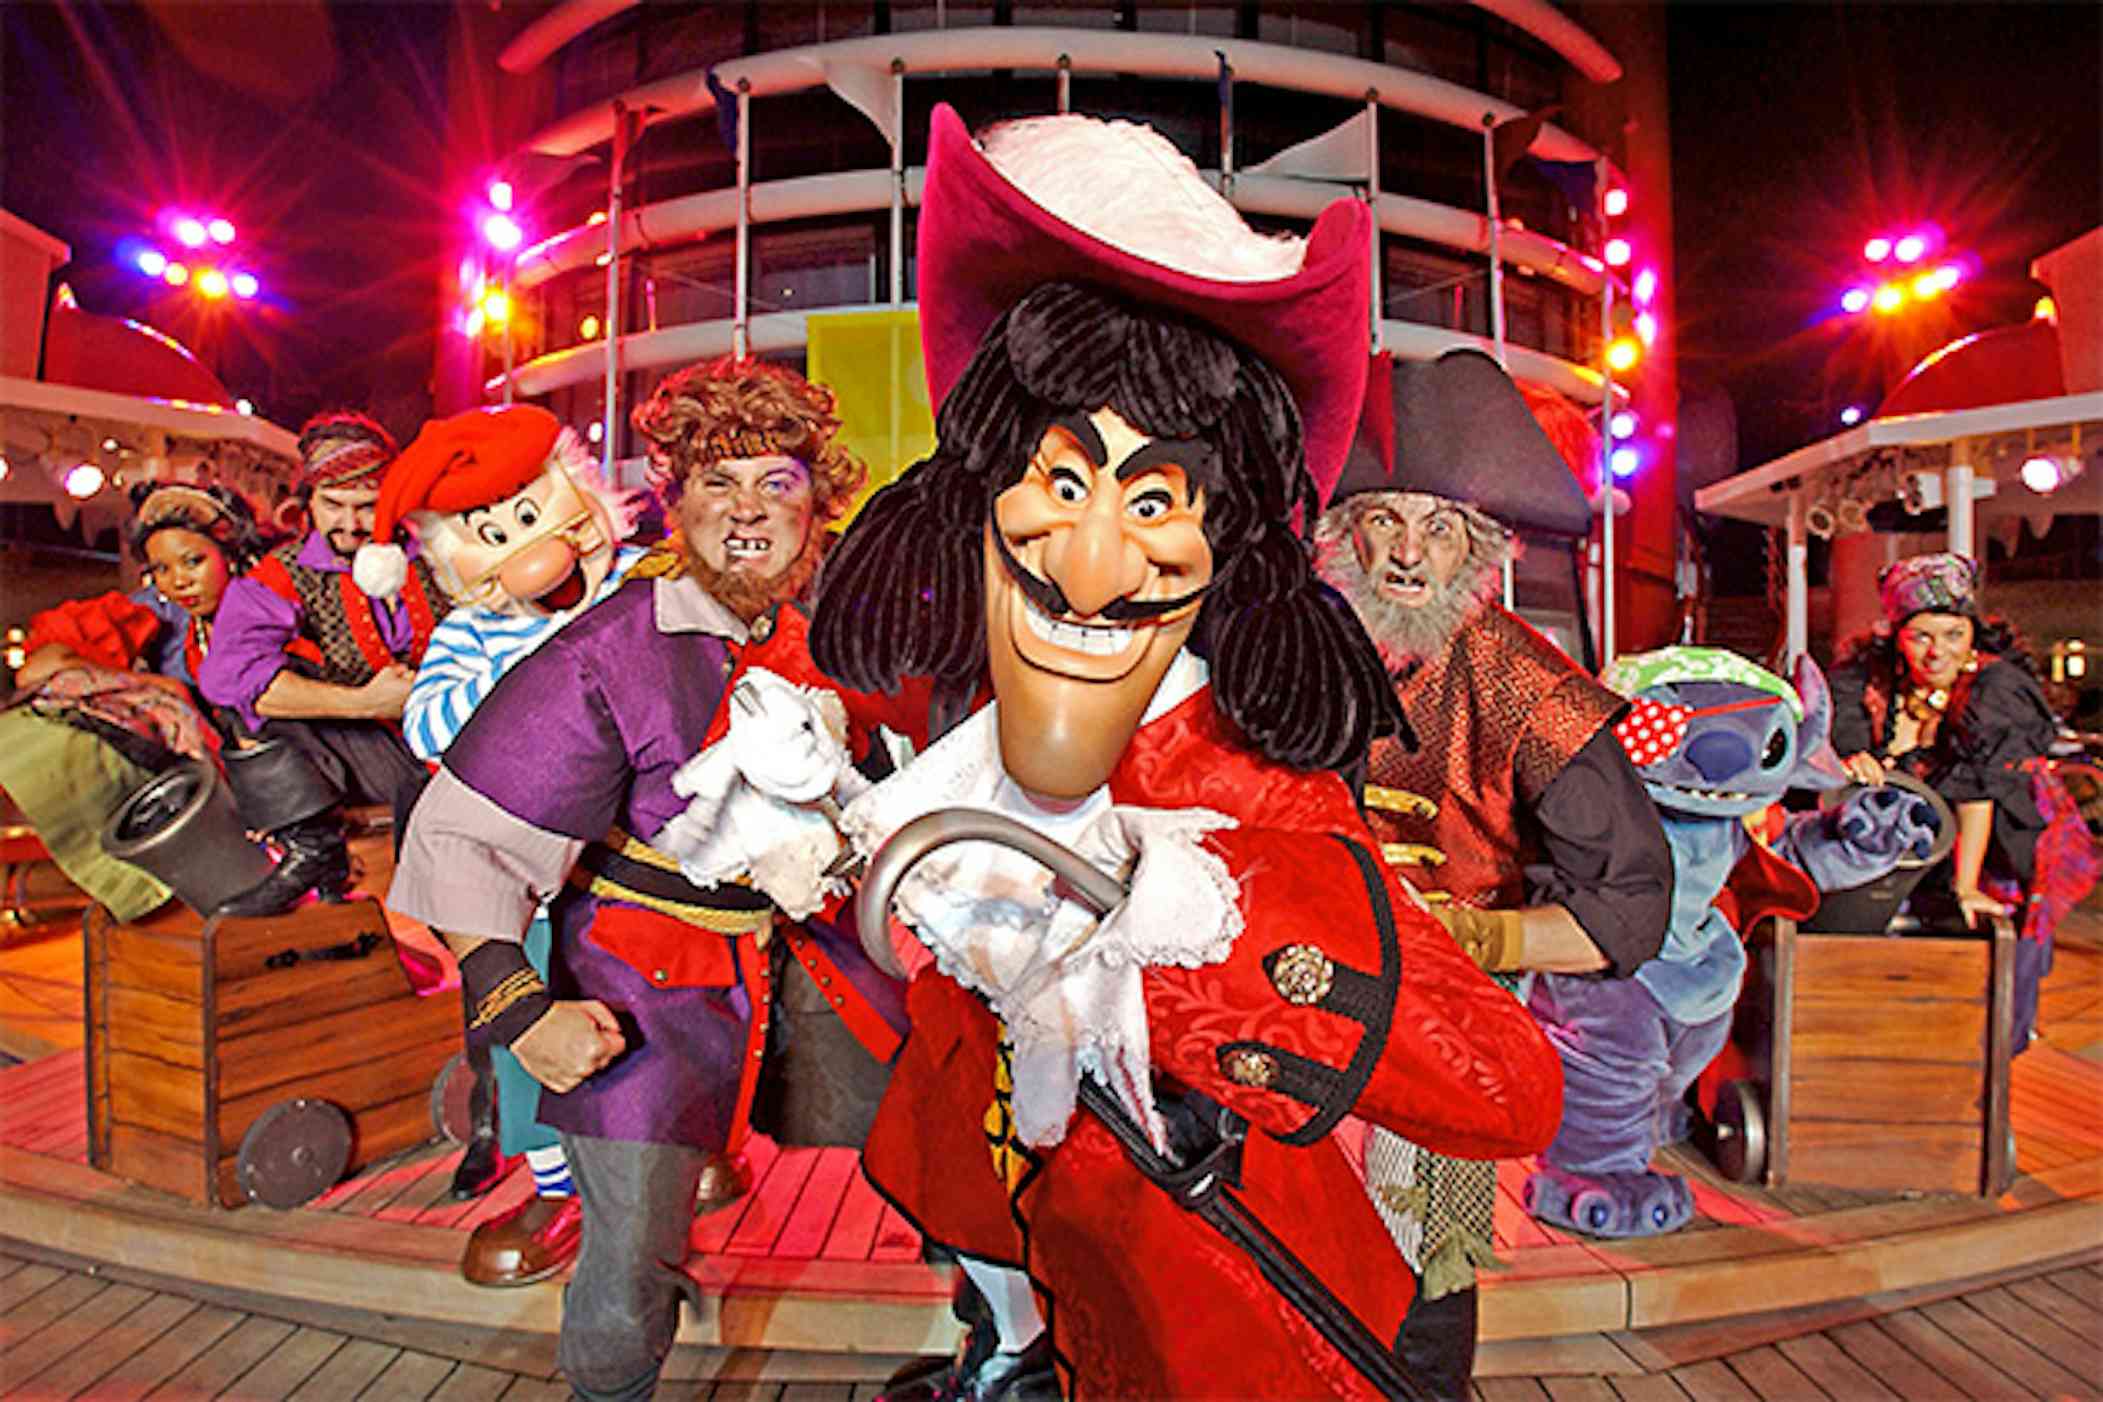 All About the Disney Cruise Pirate Night - Family Travel Magazine